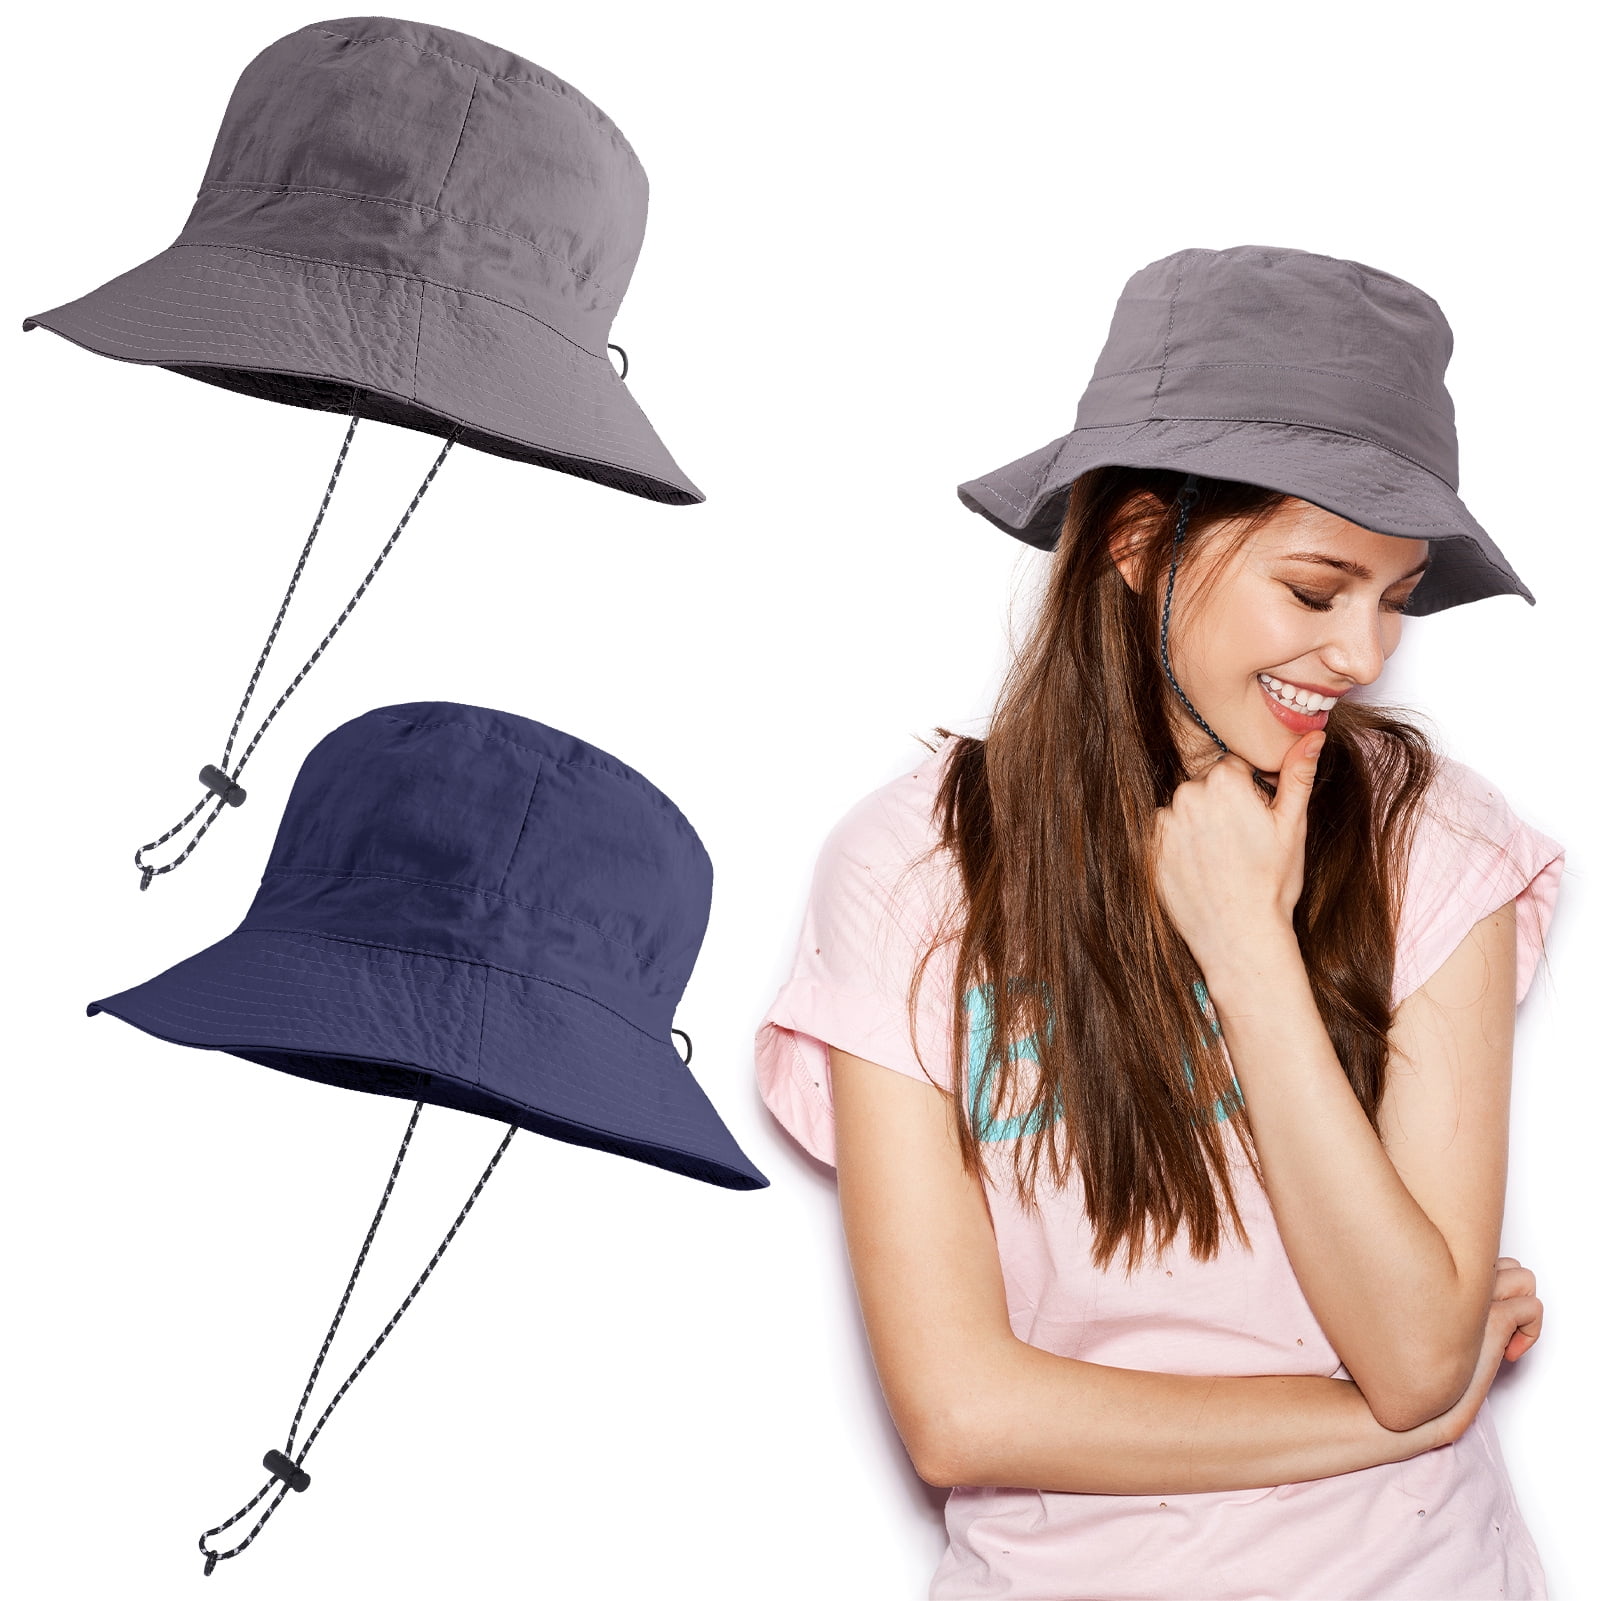 Fly Fishing Embroidered Pigment Dyed Bucket Hat